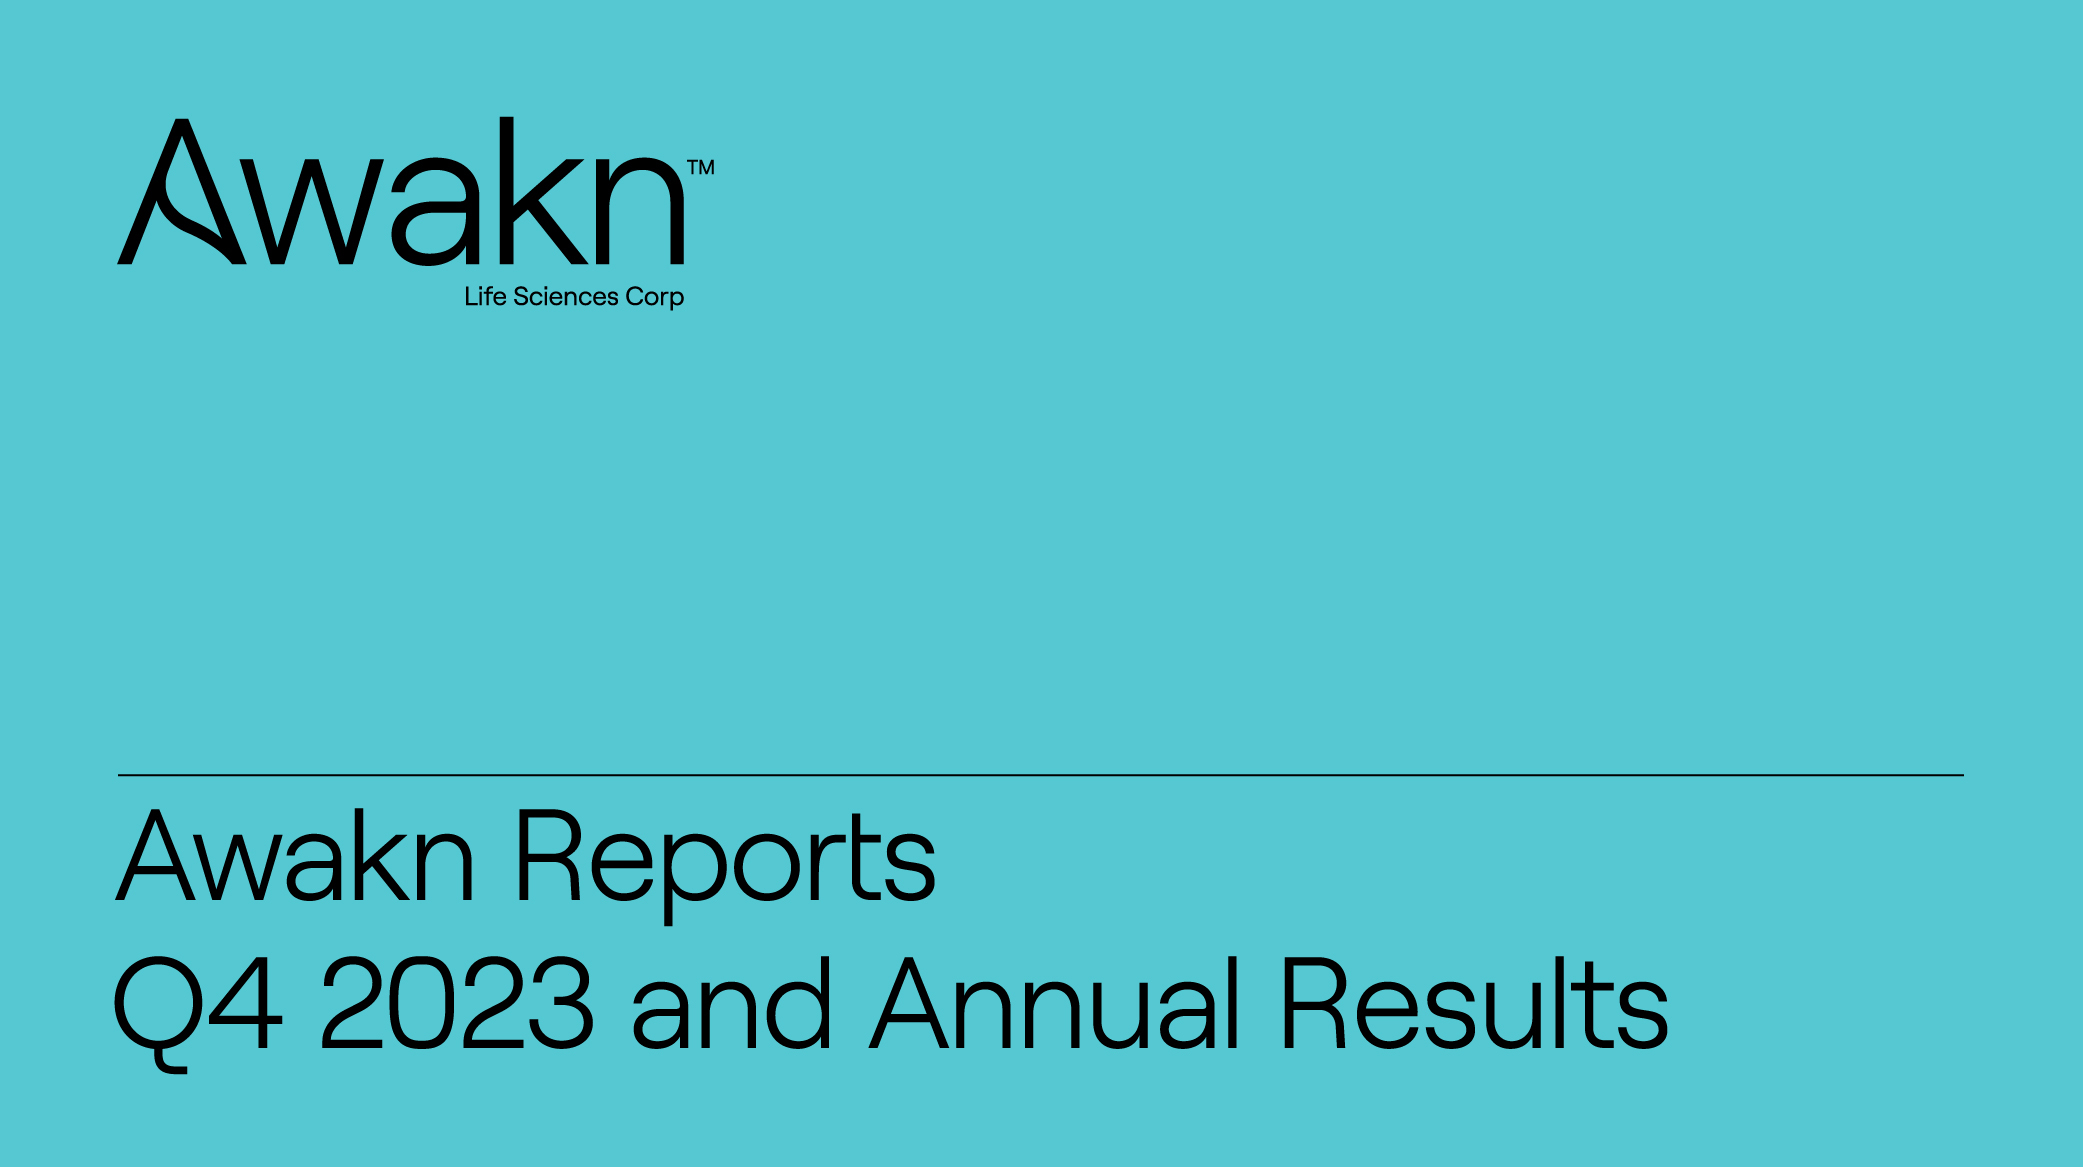 AWAKN LIFE SCIENCES REPORTS Q4 2023 AND ANNUAL RESULTS